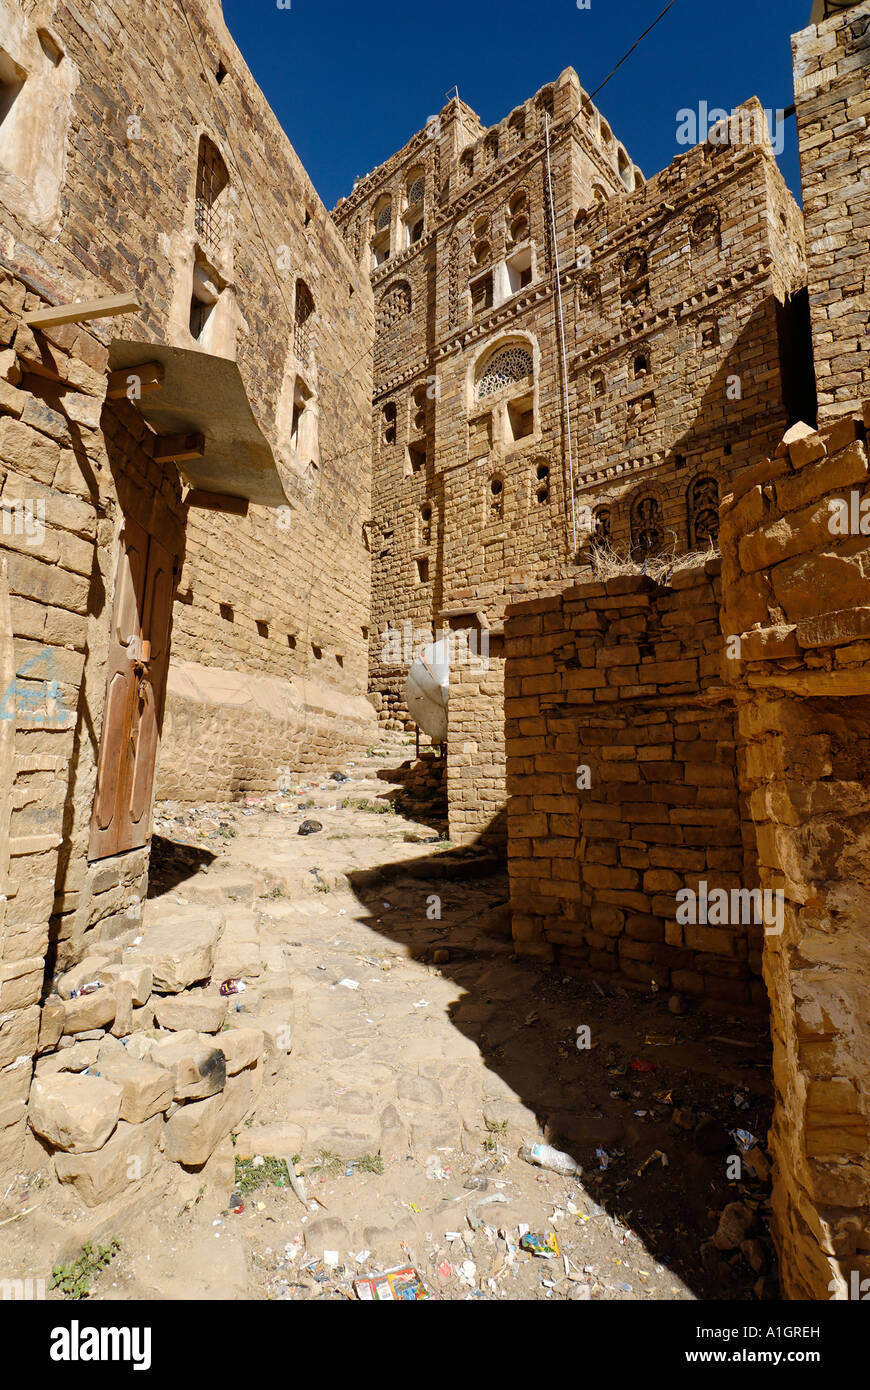 decorated stone houses in the old town of Thula Yemen Stock Photo